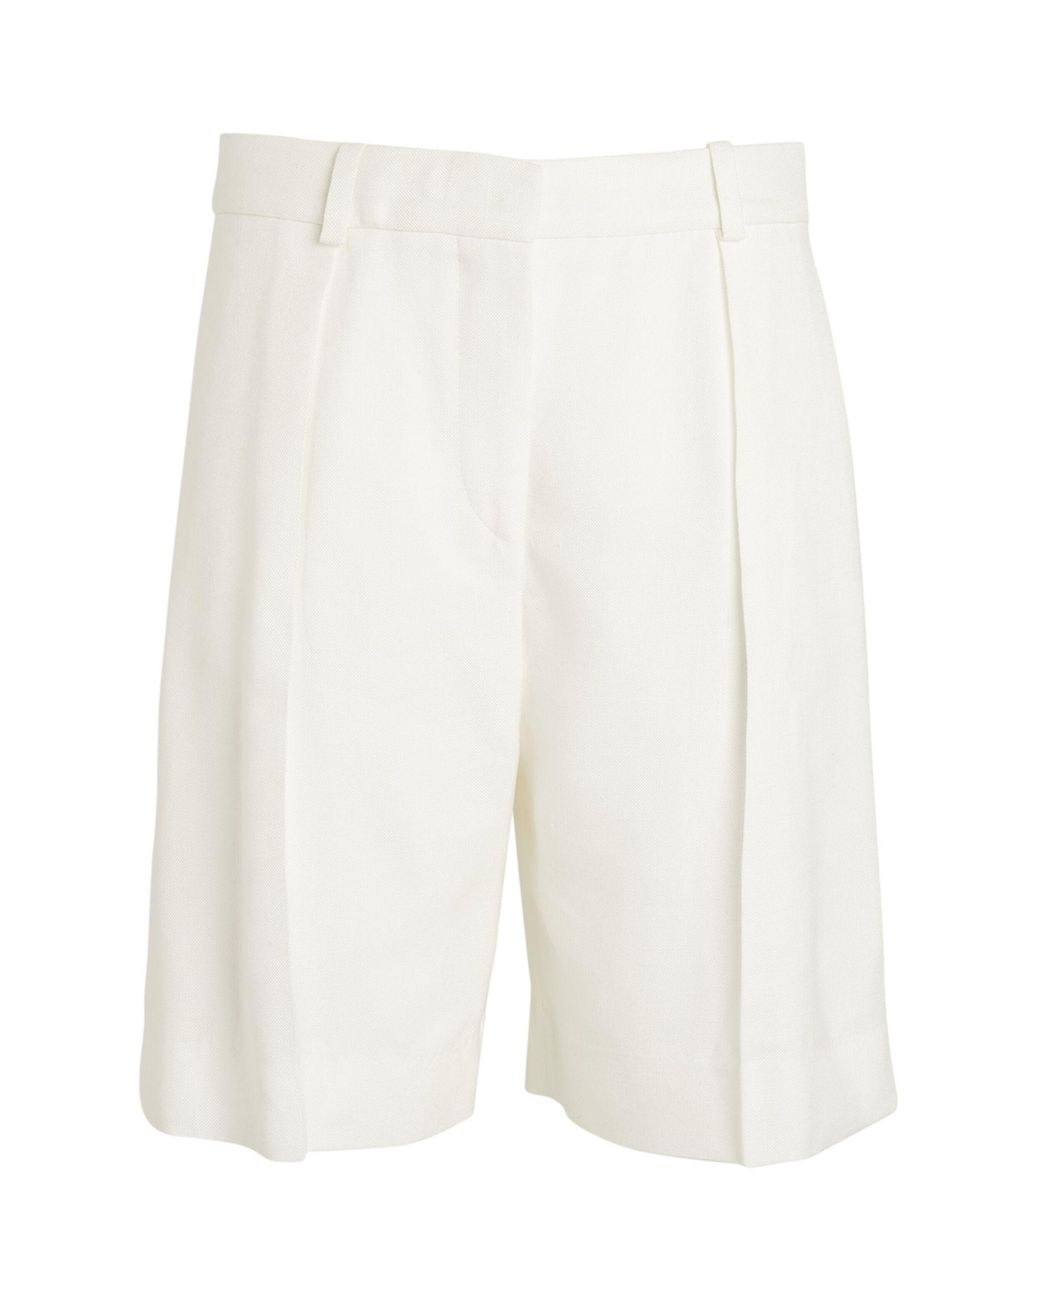 Victoria, Victoria Beckham Synthetic Tailored Shorts in White - Lyst